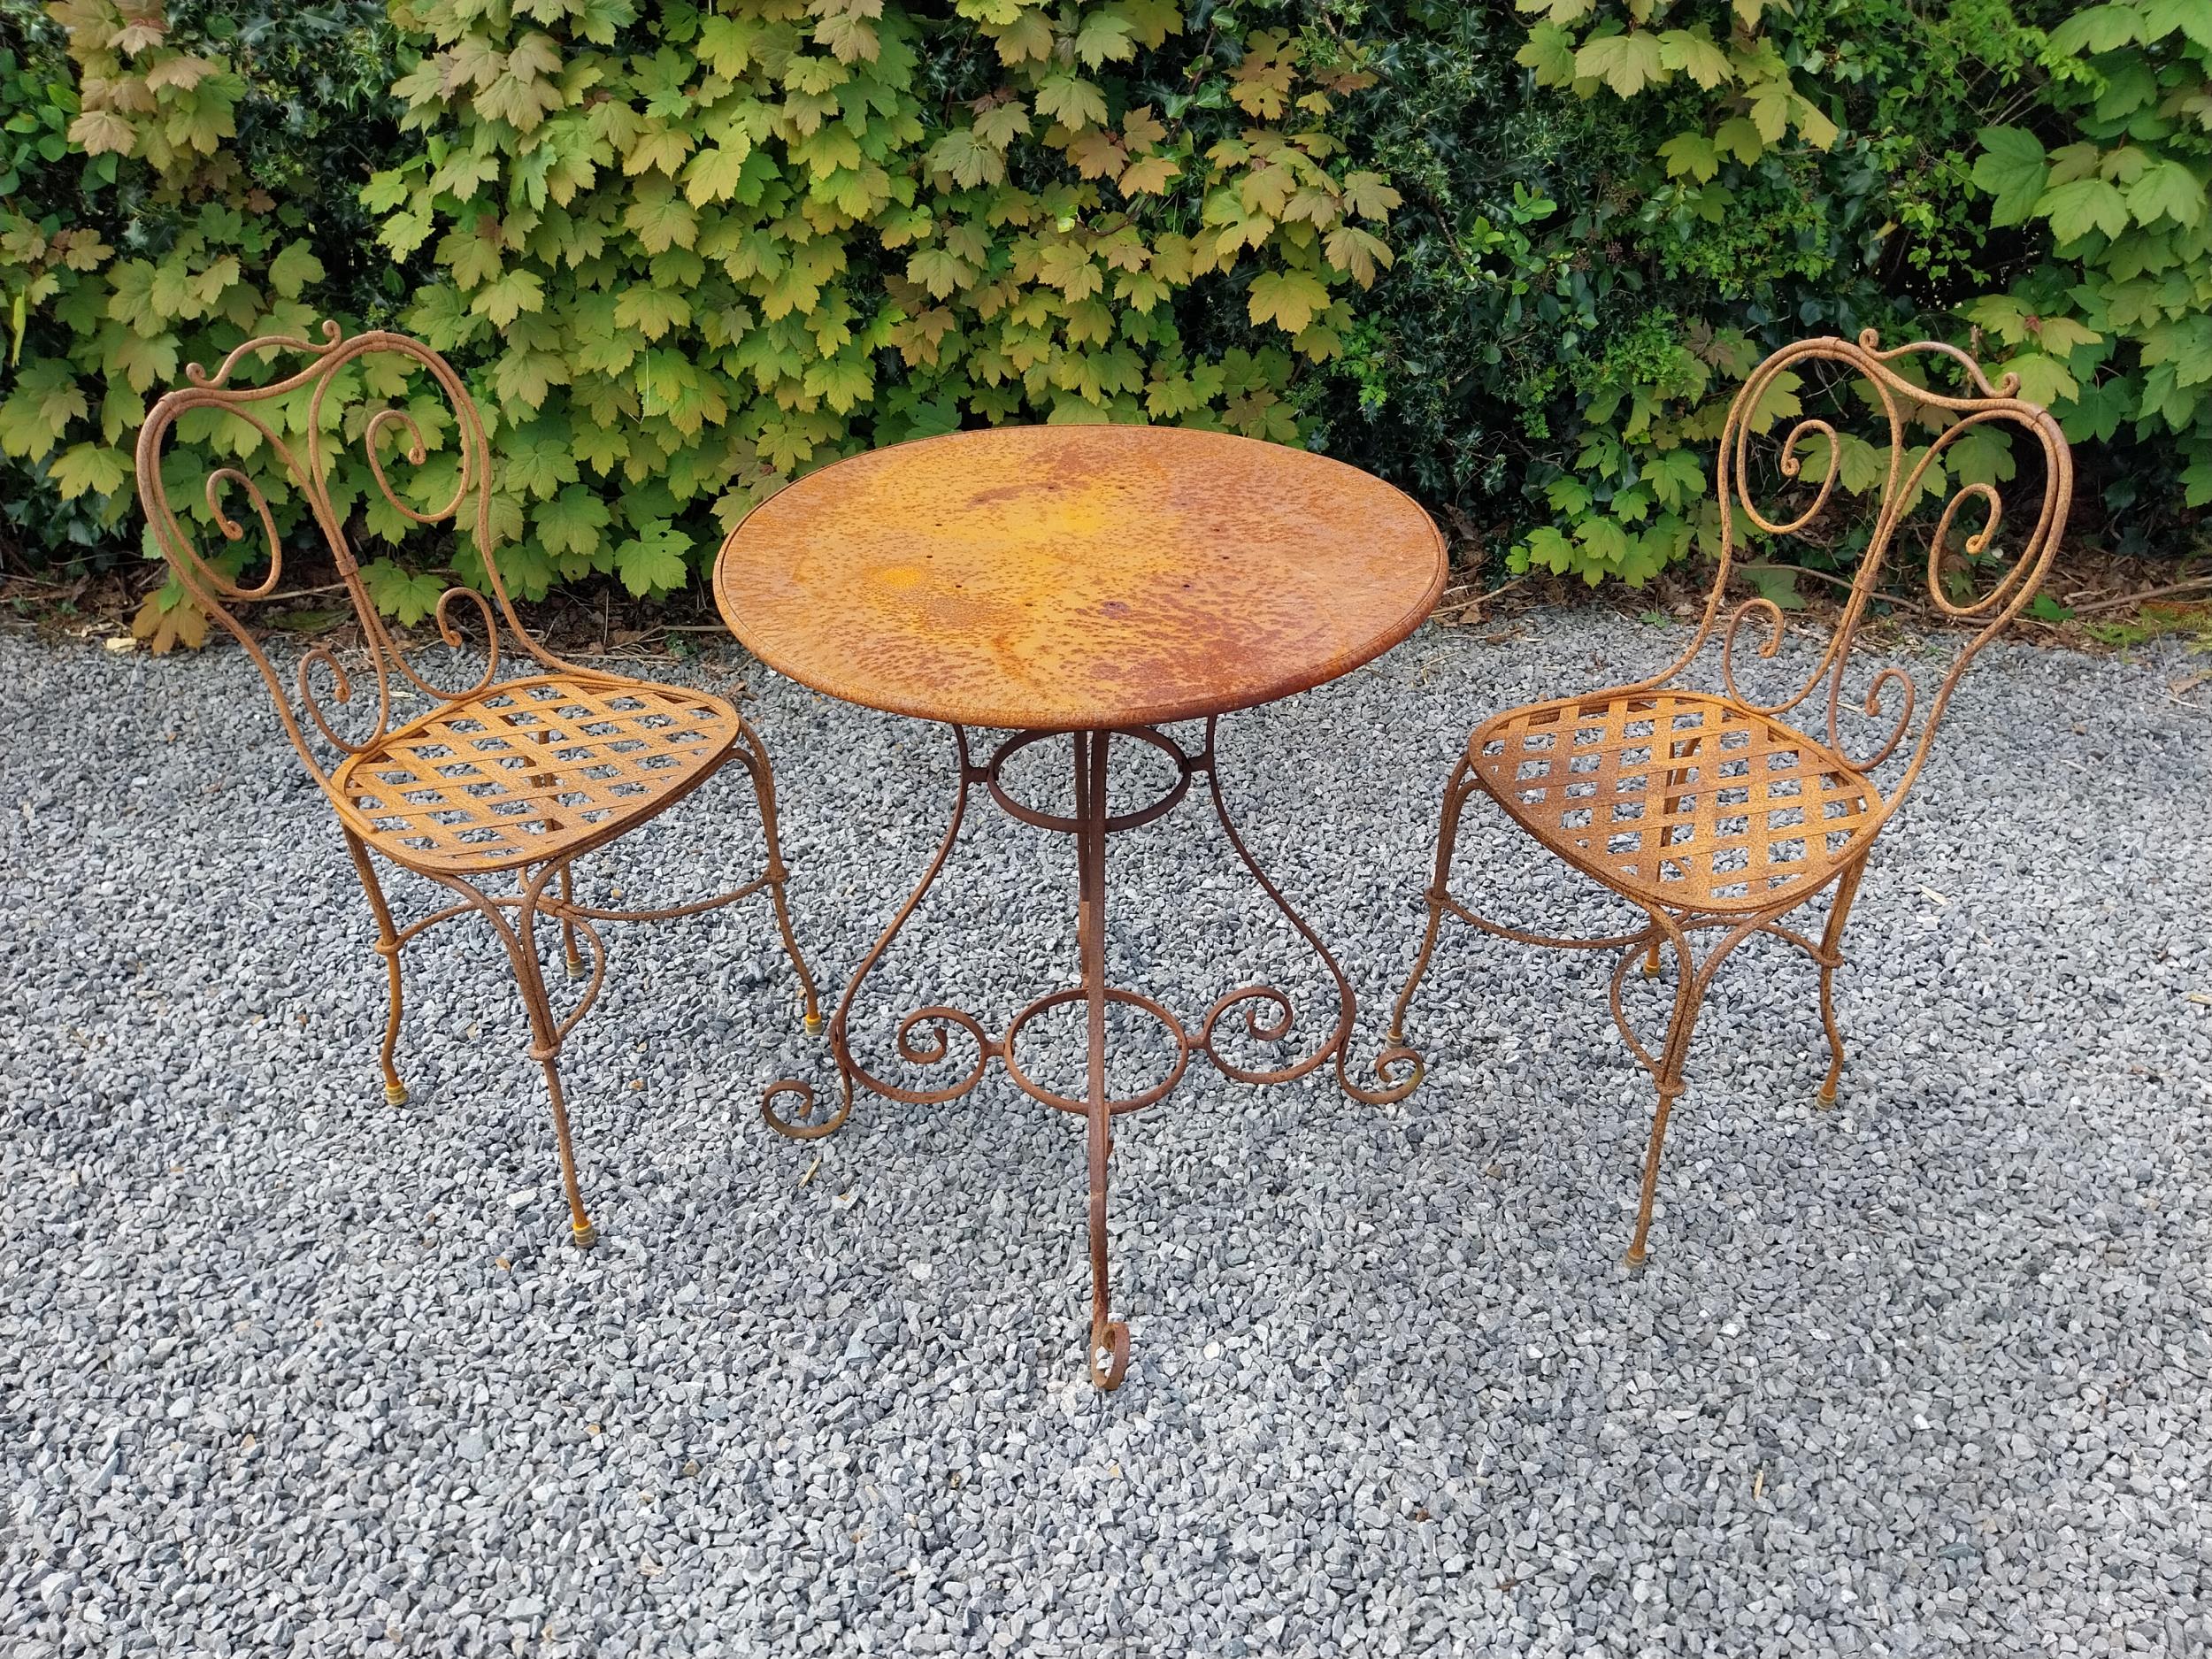 Wrought iron café - garden circular table with two matching chairs {Tbl. 75 cm H x 70 cm Dia. Chairs - Image 2 of 10